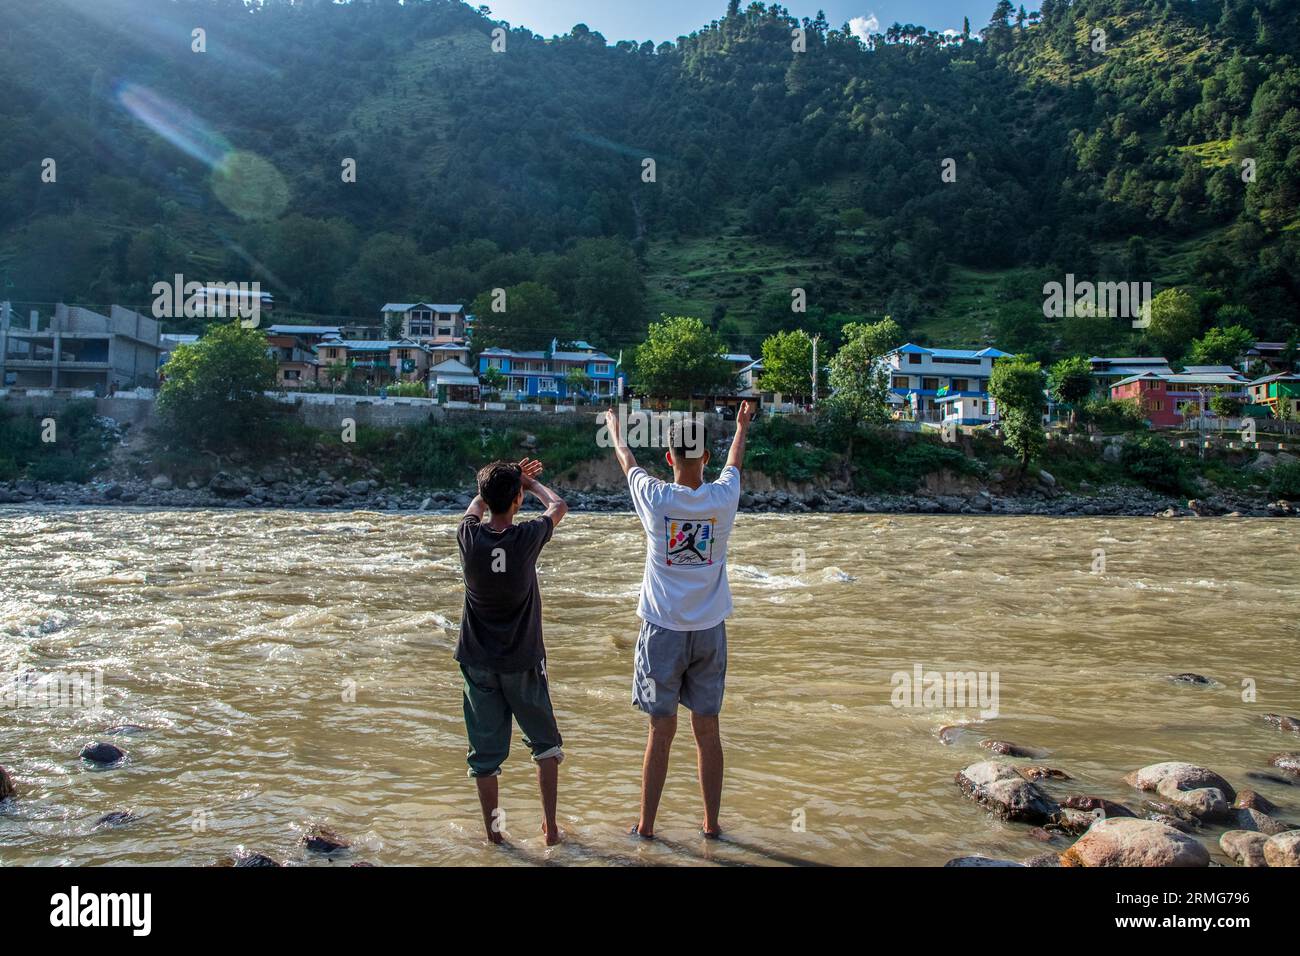 Keran Kupwara, India. 24th Aug, 2023. Local visitors waving to people in Pakistan administered Kashmir on the banks of Neelam river or Kishan Ganga that has divided Kashmir into two parts controlled by nuclear rivals India and Pakistan. The river acts as a disputed line of control and flows through a village called Keran from both sides which is located on the northern side of Indian Kashmir's Border district Kupwara some 150kms from Srinagar and 93kms from Muzaffarabad, in the Pakistan side of Kashmir. (Photo by Faisal Bashir/SOPA Images/Sipa USA) Credit: Sipa USA/Alamy Live News Stock Photo